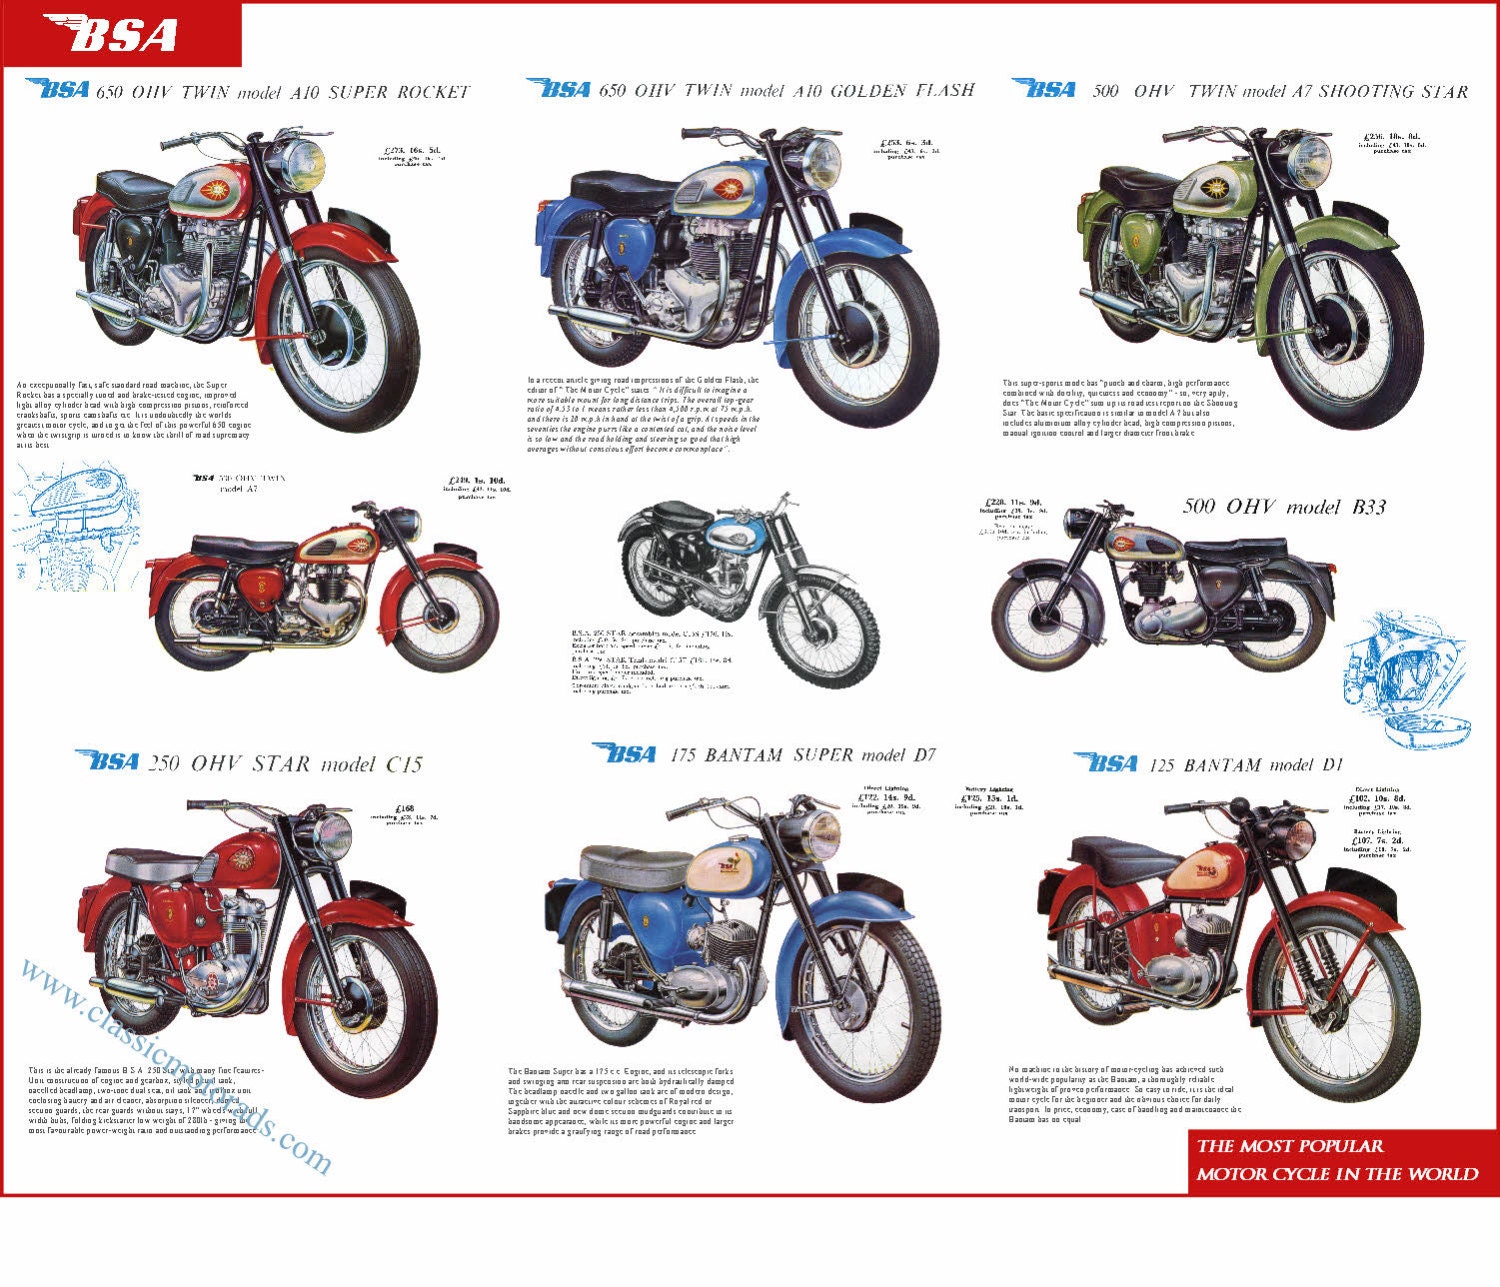 Classic BSA Motorcycle Poster Reproduced From the Original - Etsy